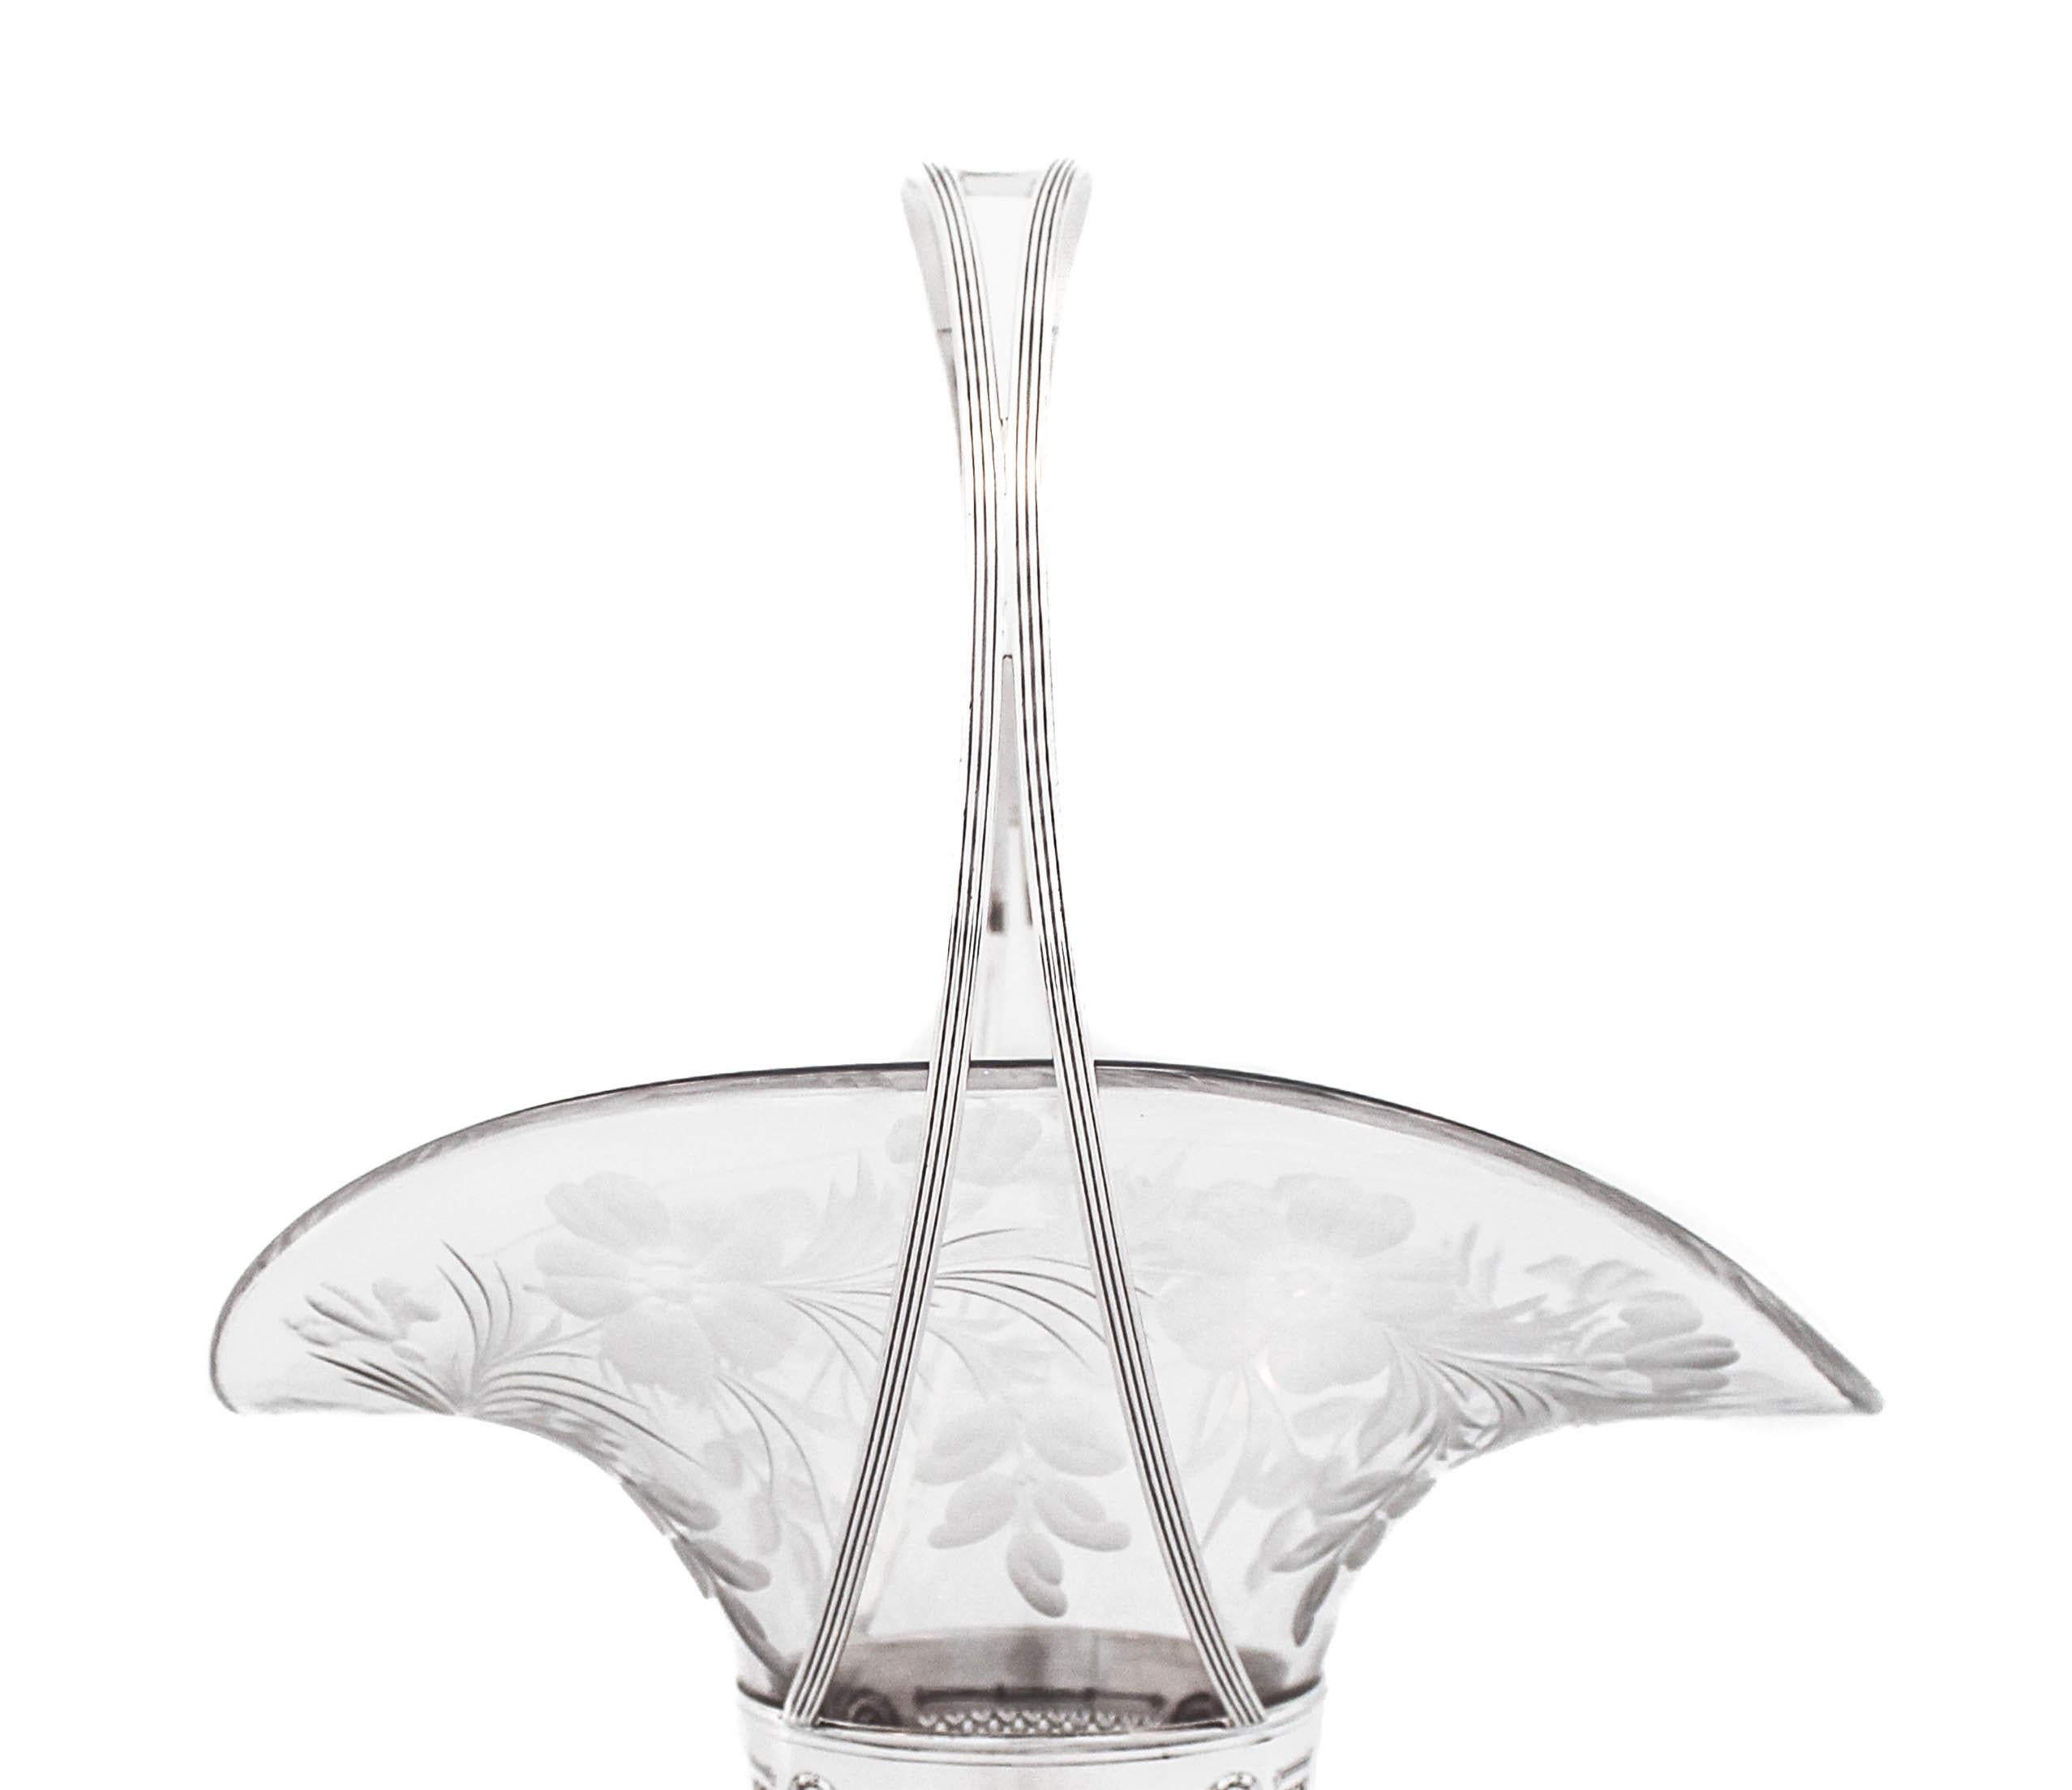 Being offered is a sterling silver vase with handle (basket) made by Dominick and Haff of New York.  It has the original glass liner which is oval shaped with an acid-etched floral design.  Along the top of the silver there’s a cutout design going